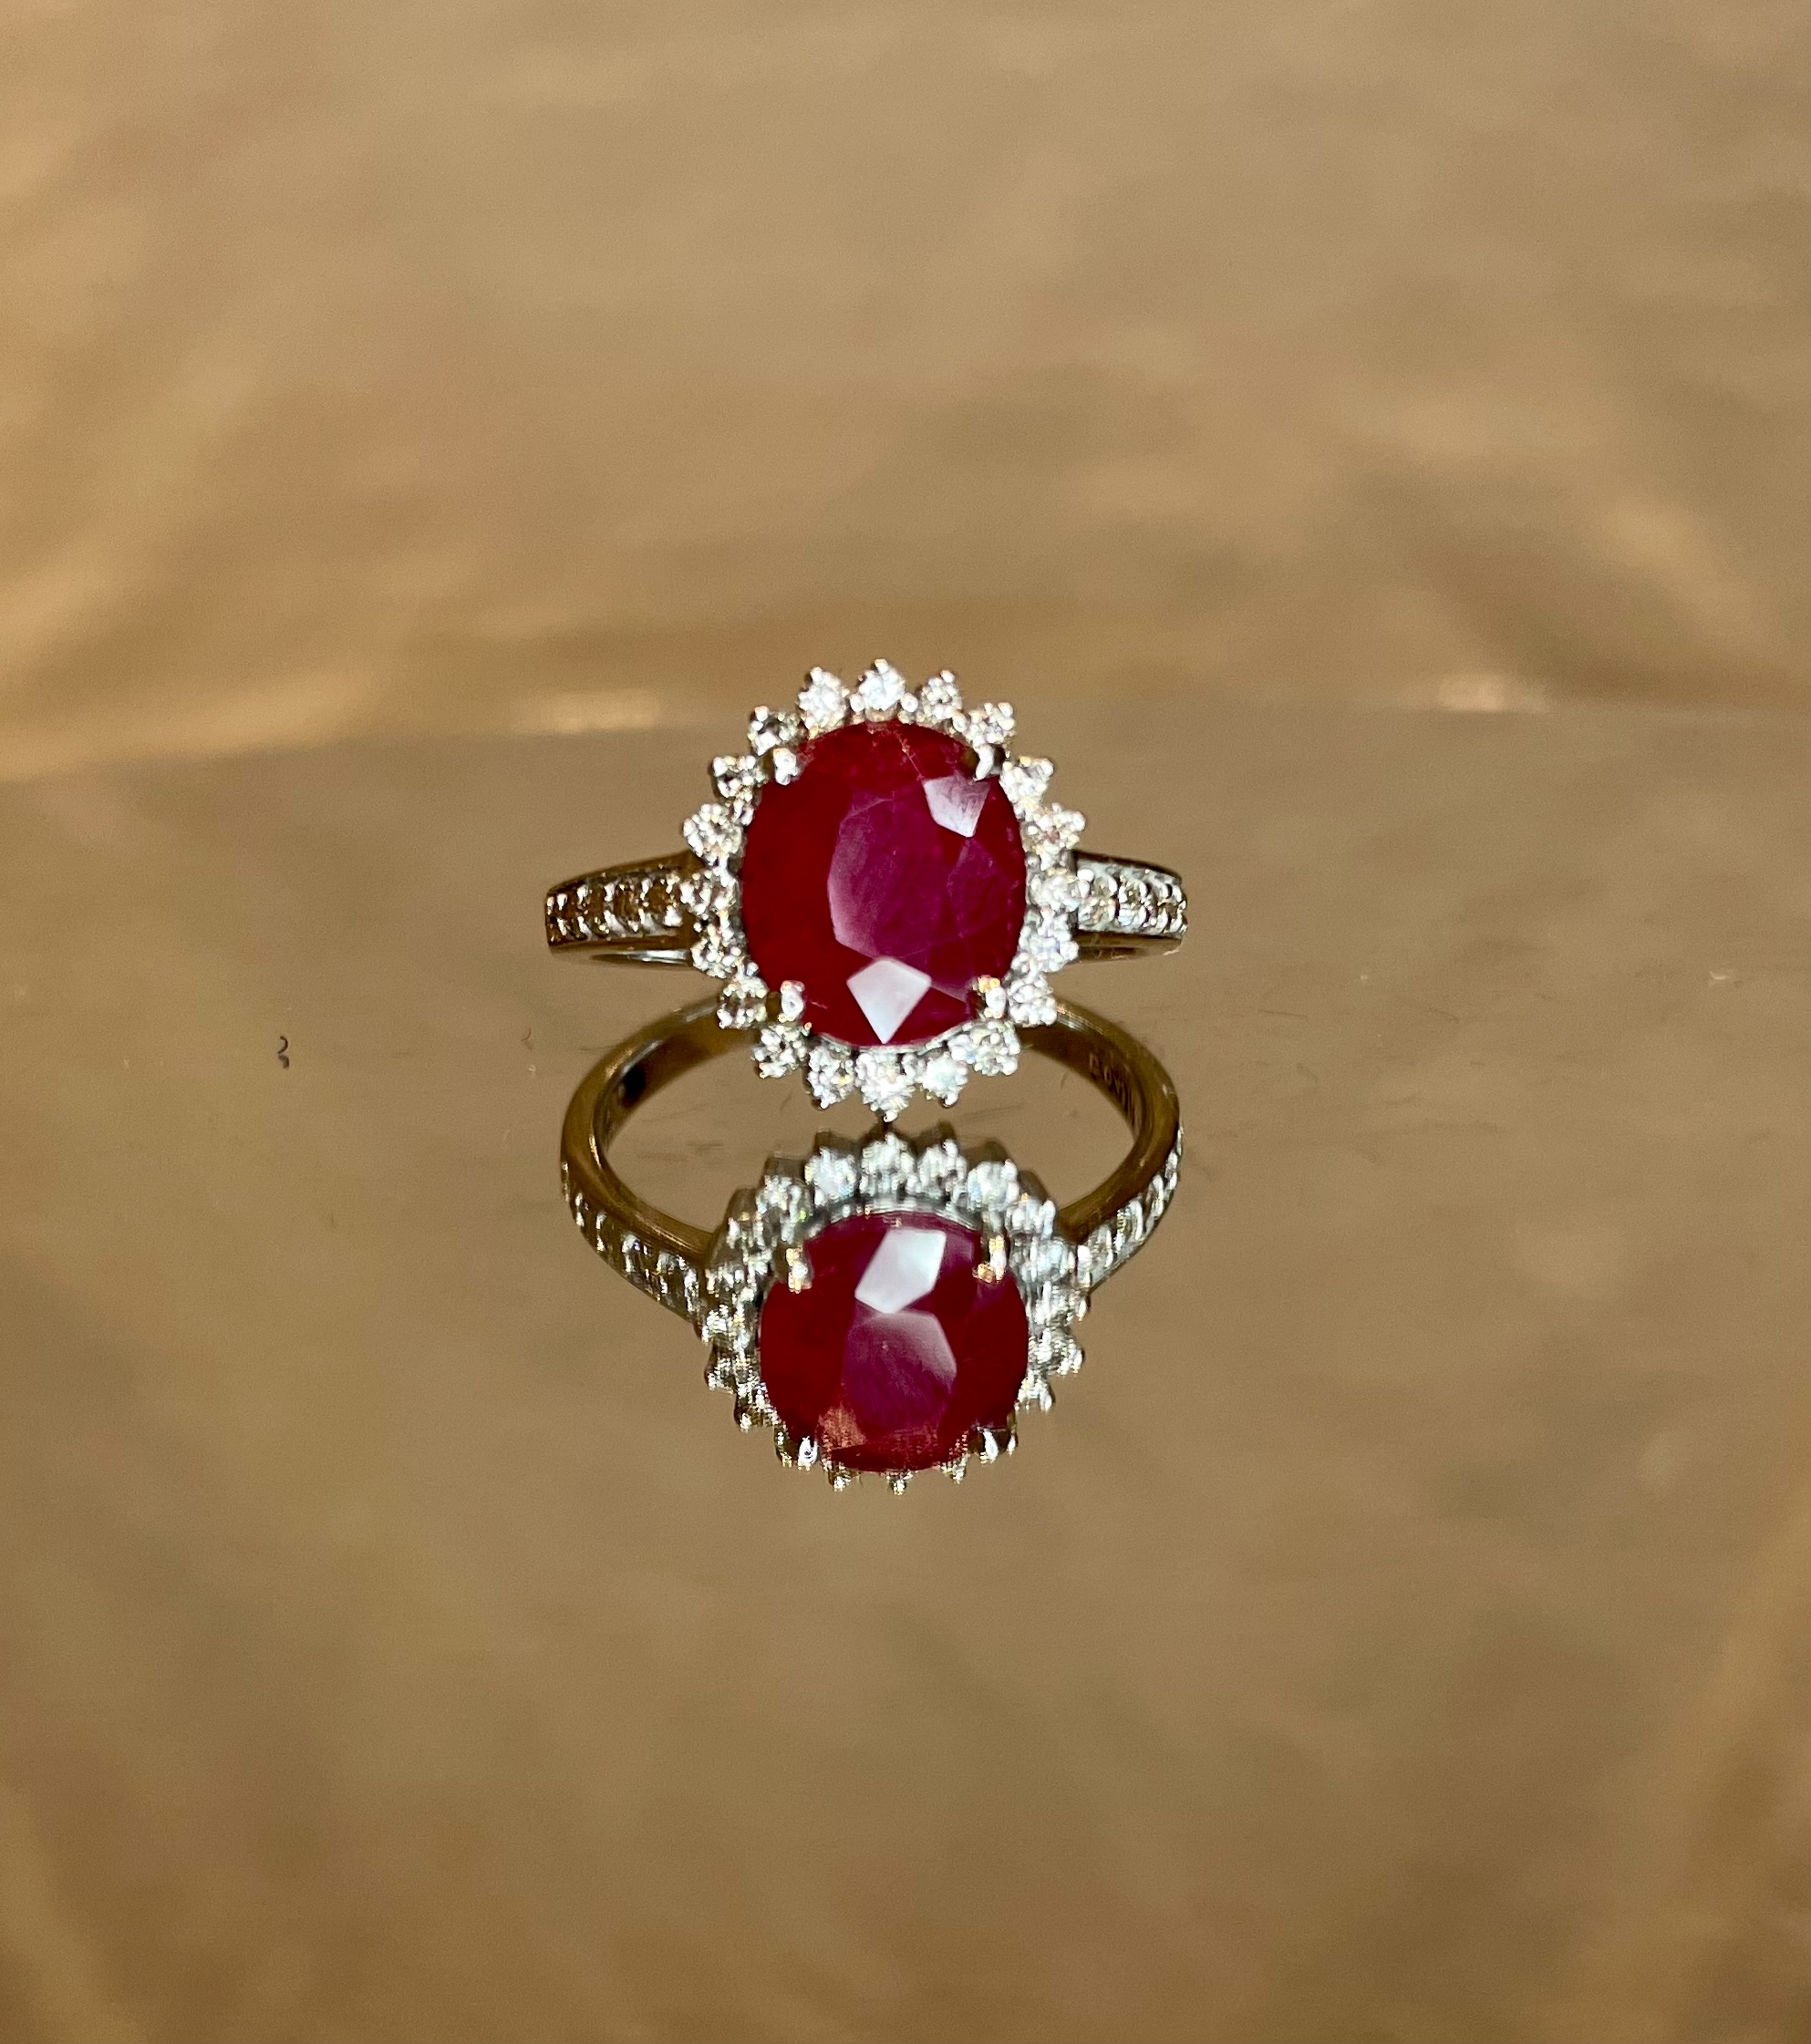 Natural Burmese Ruby Ring 2.15 Ct With Natural Diamonds & 18kGold - Image 3 of 5